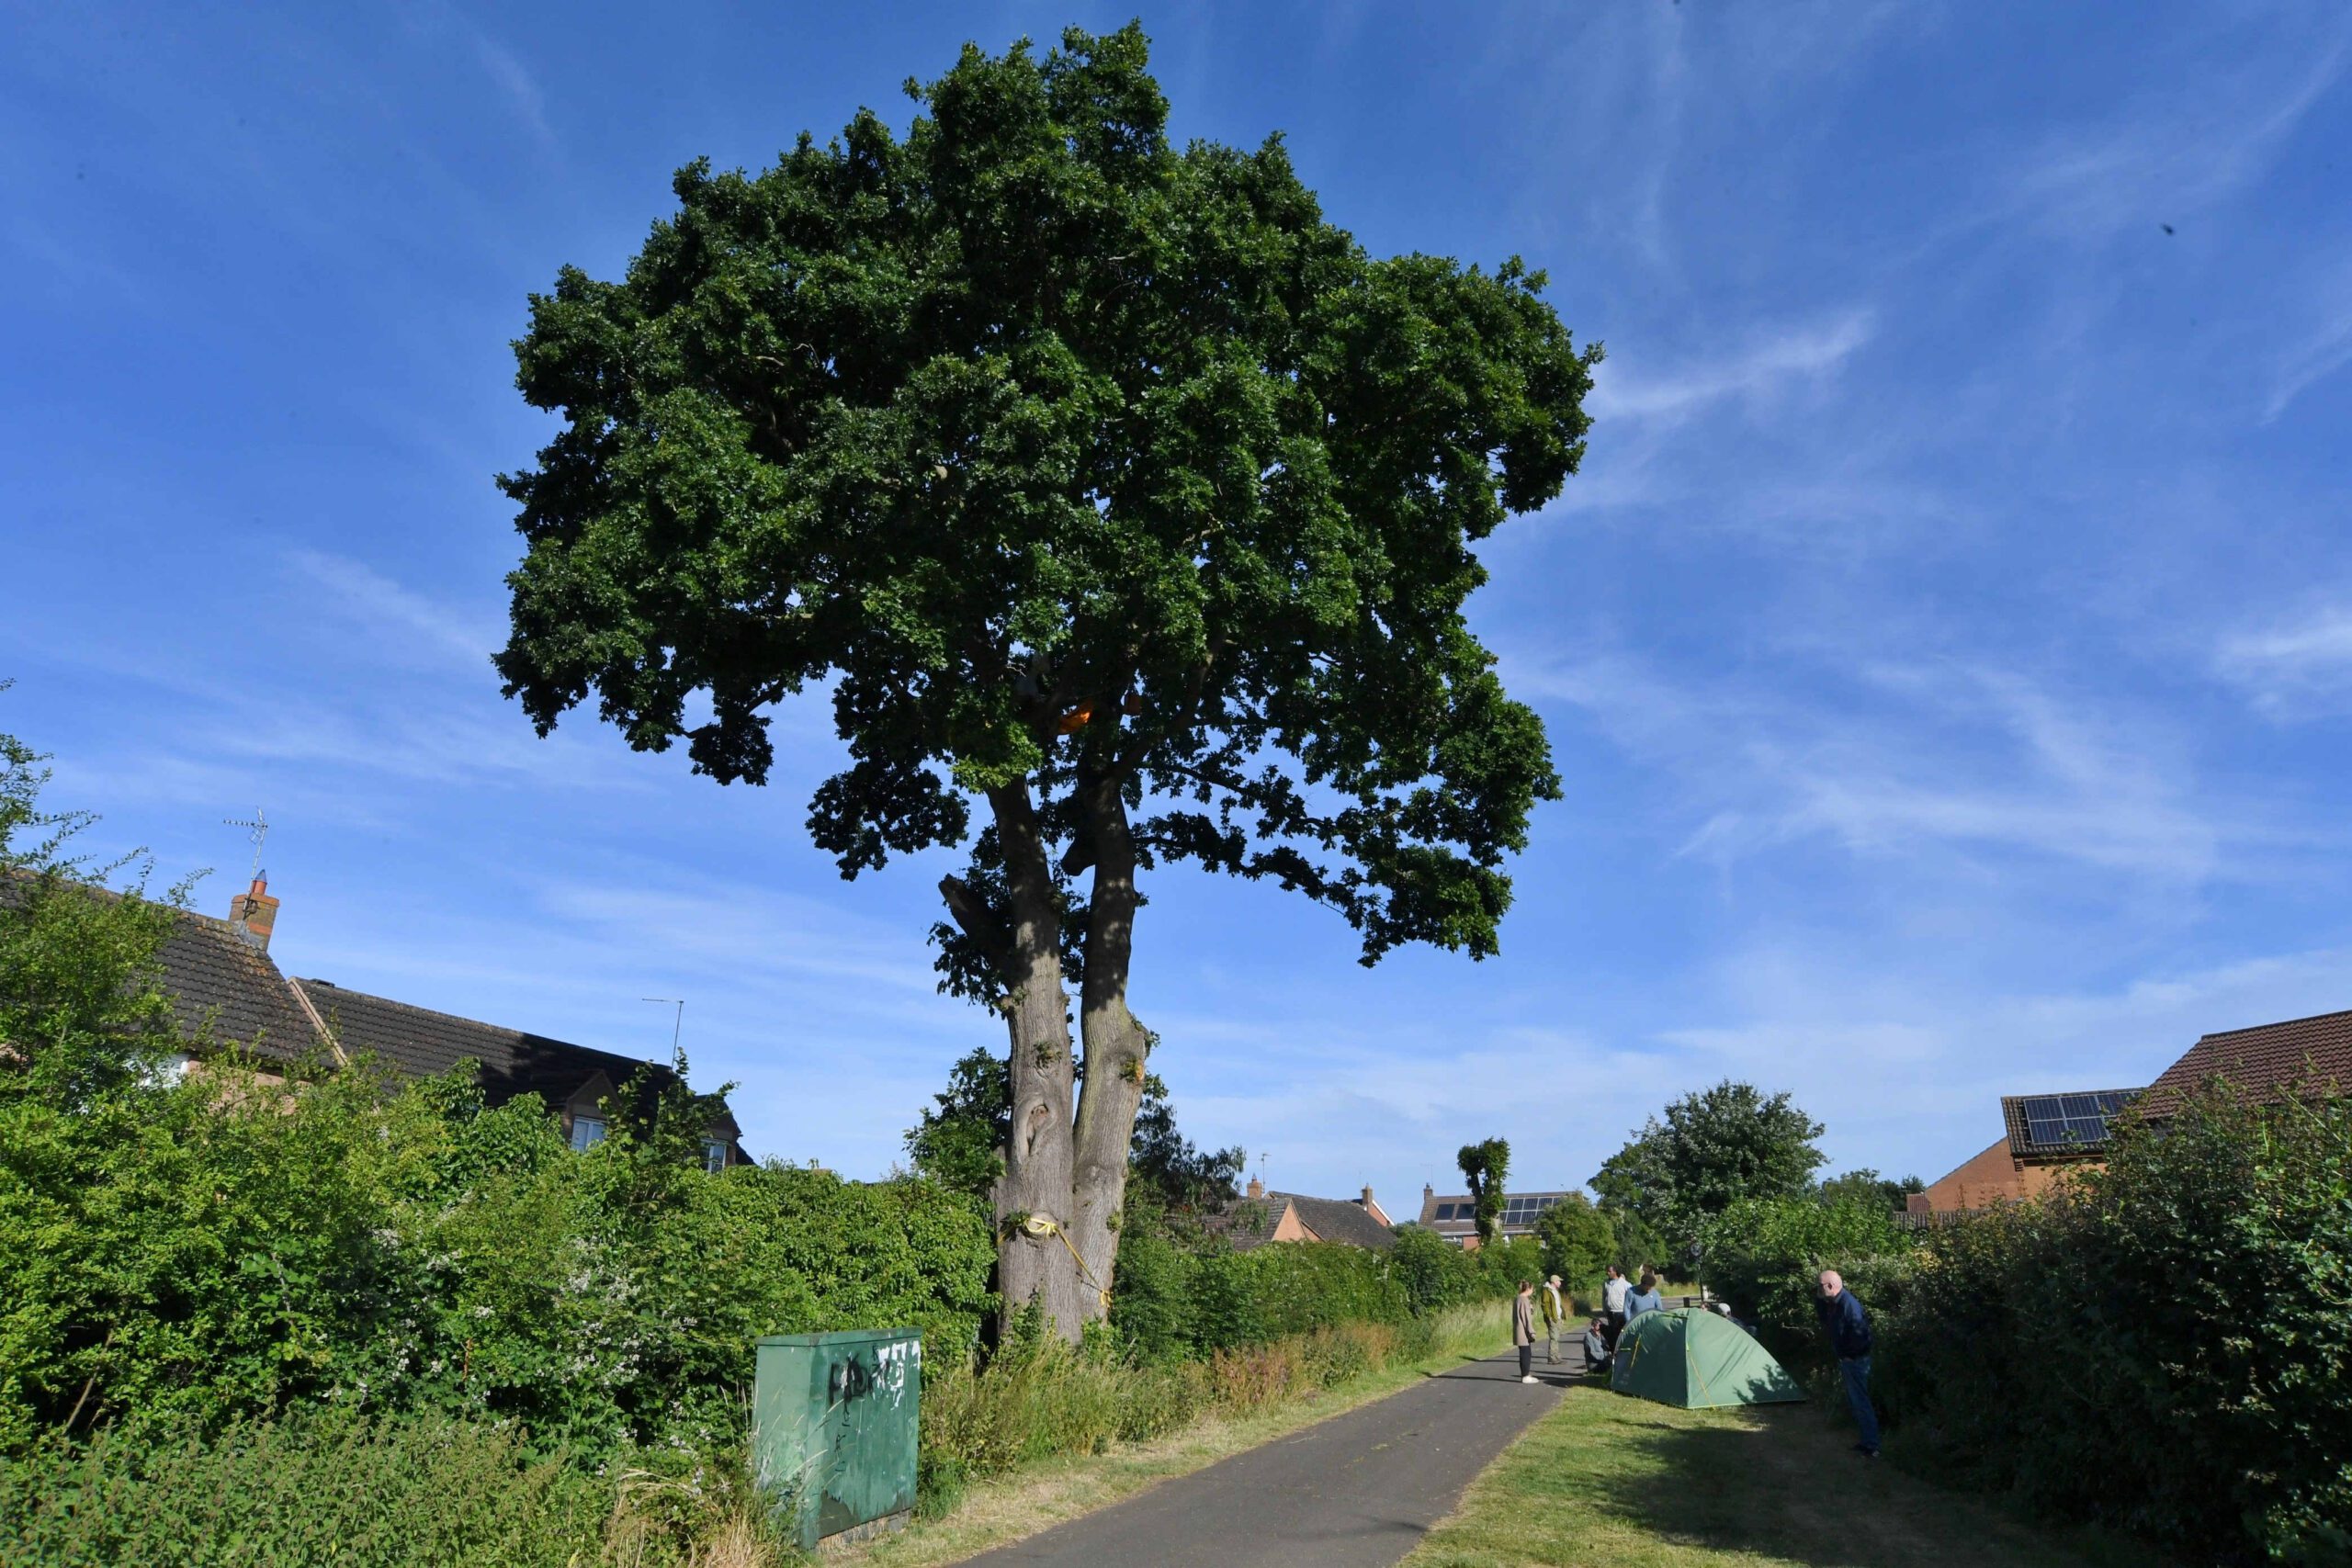 An Extinction Rebellion activist has halted the felling of a 600-year-old oak tree. (Ben Turner, SWNS/Zenger)